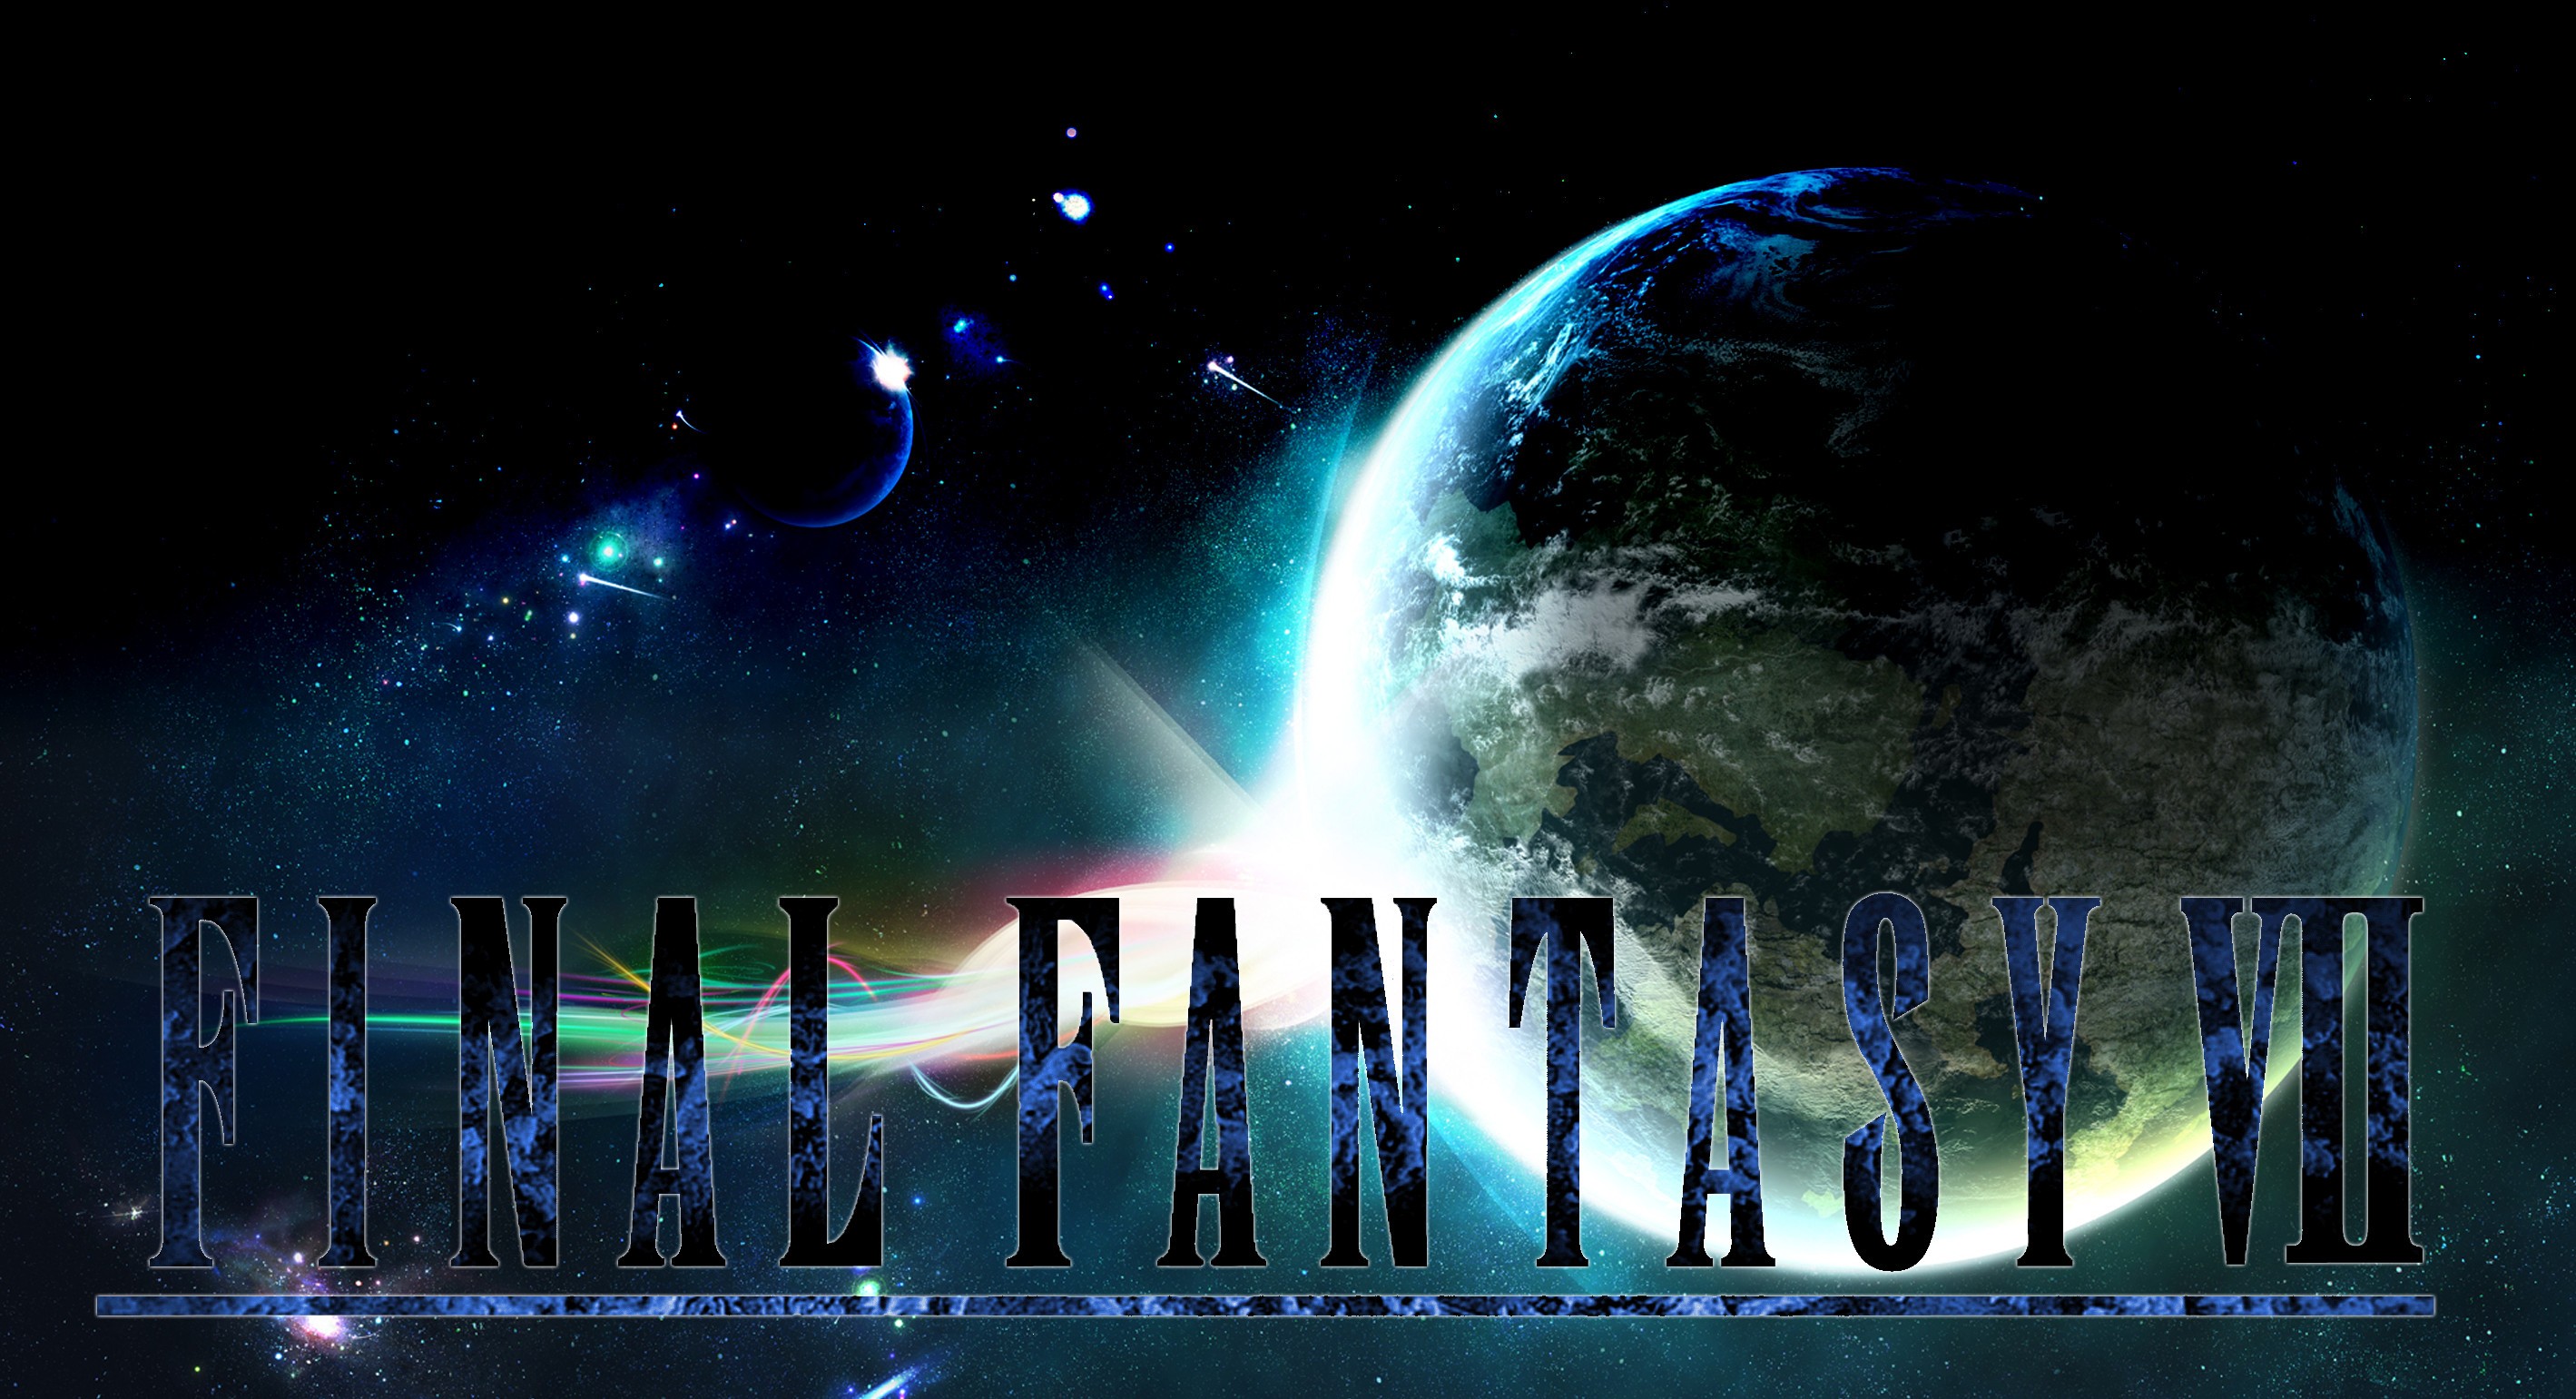 Final Fantasy Vii Wallpaper ① Download Free Awesome Full Hd